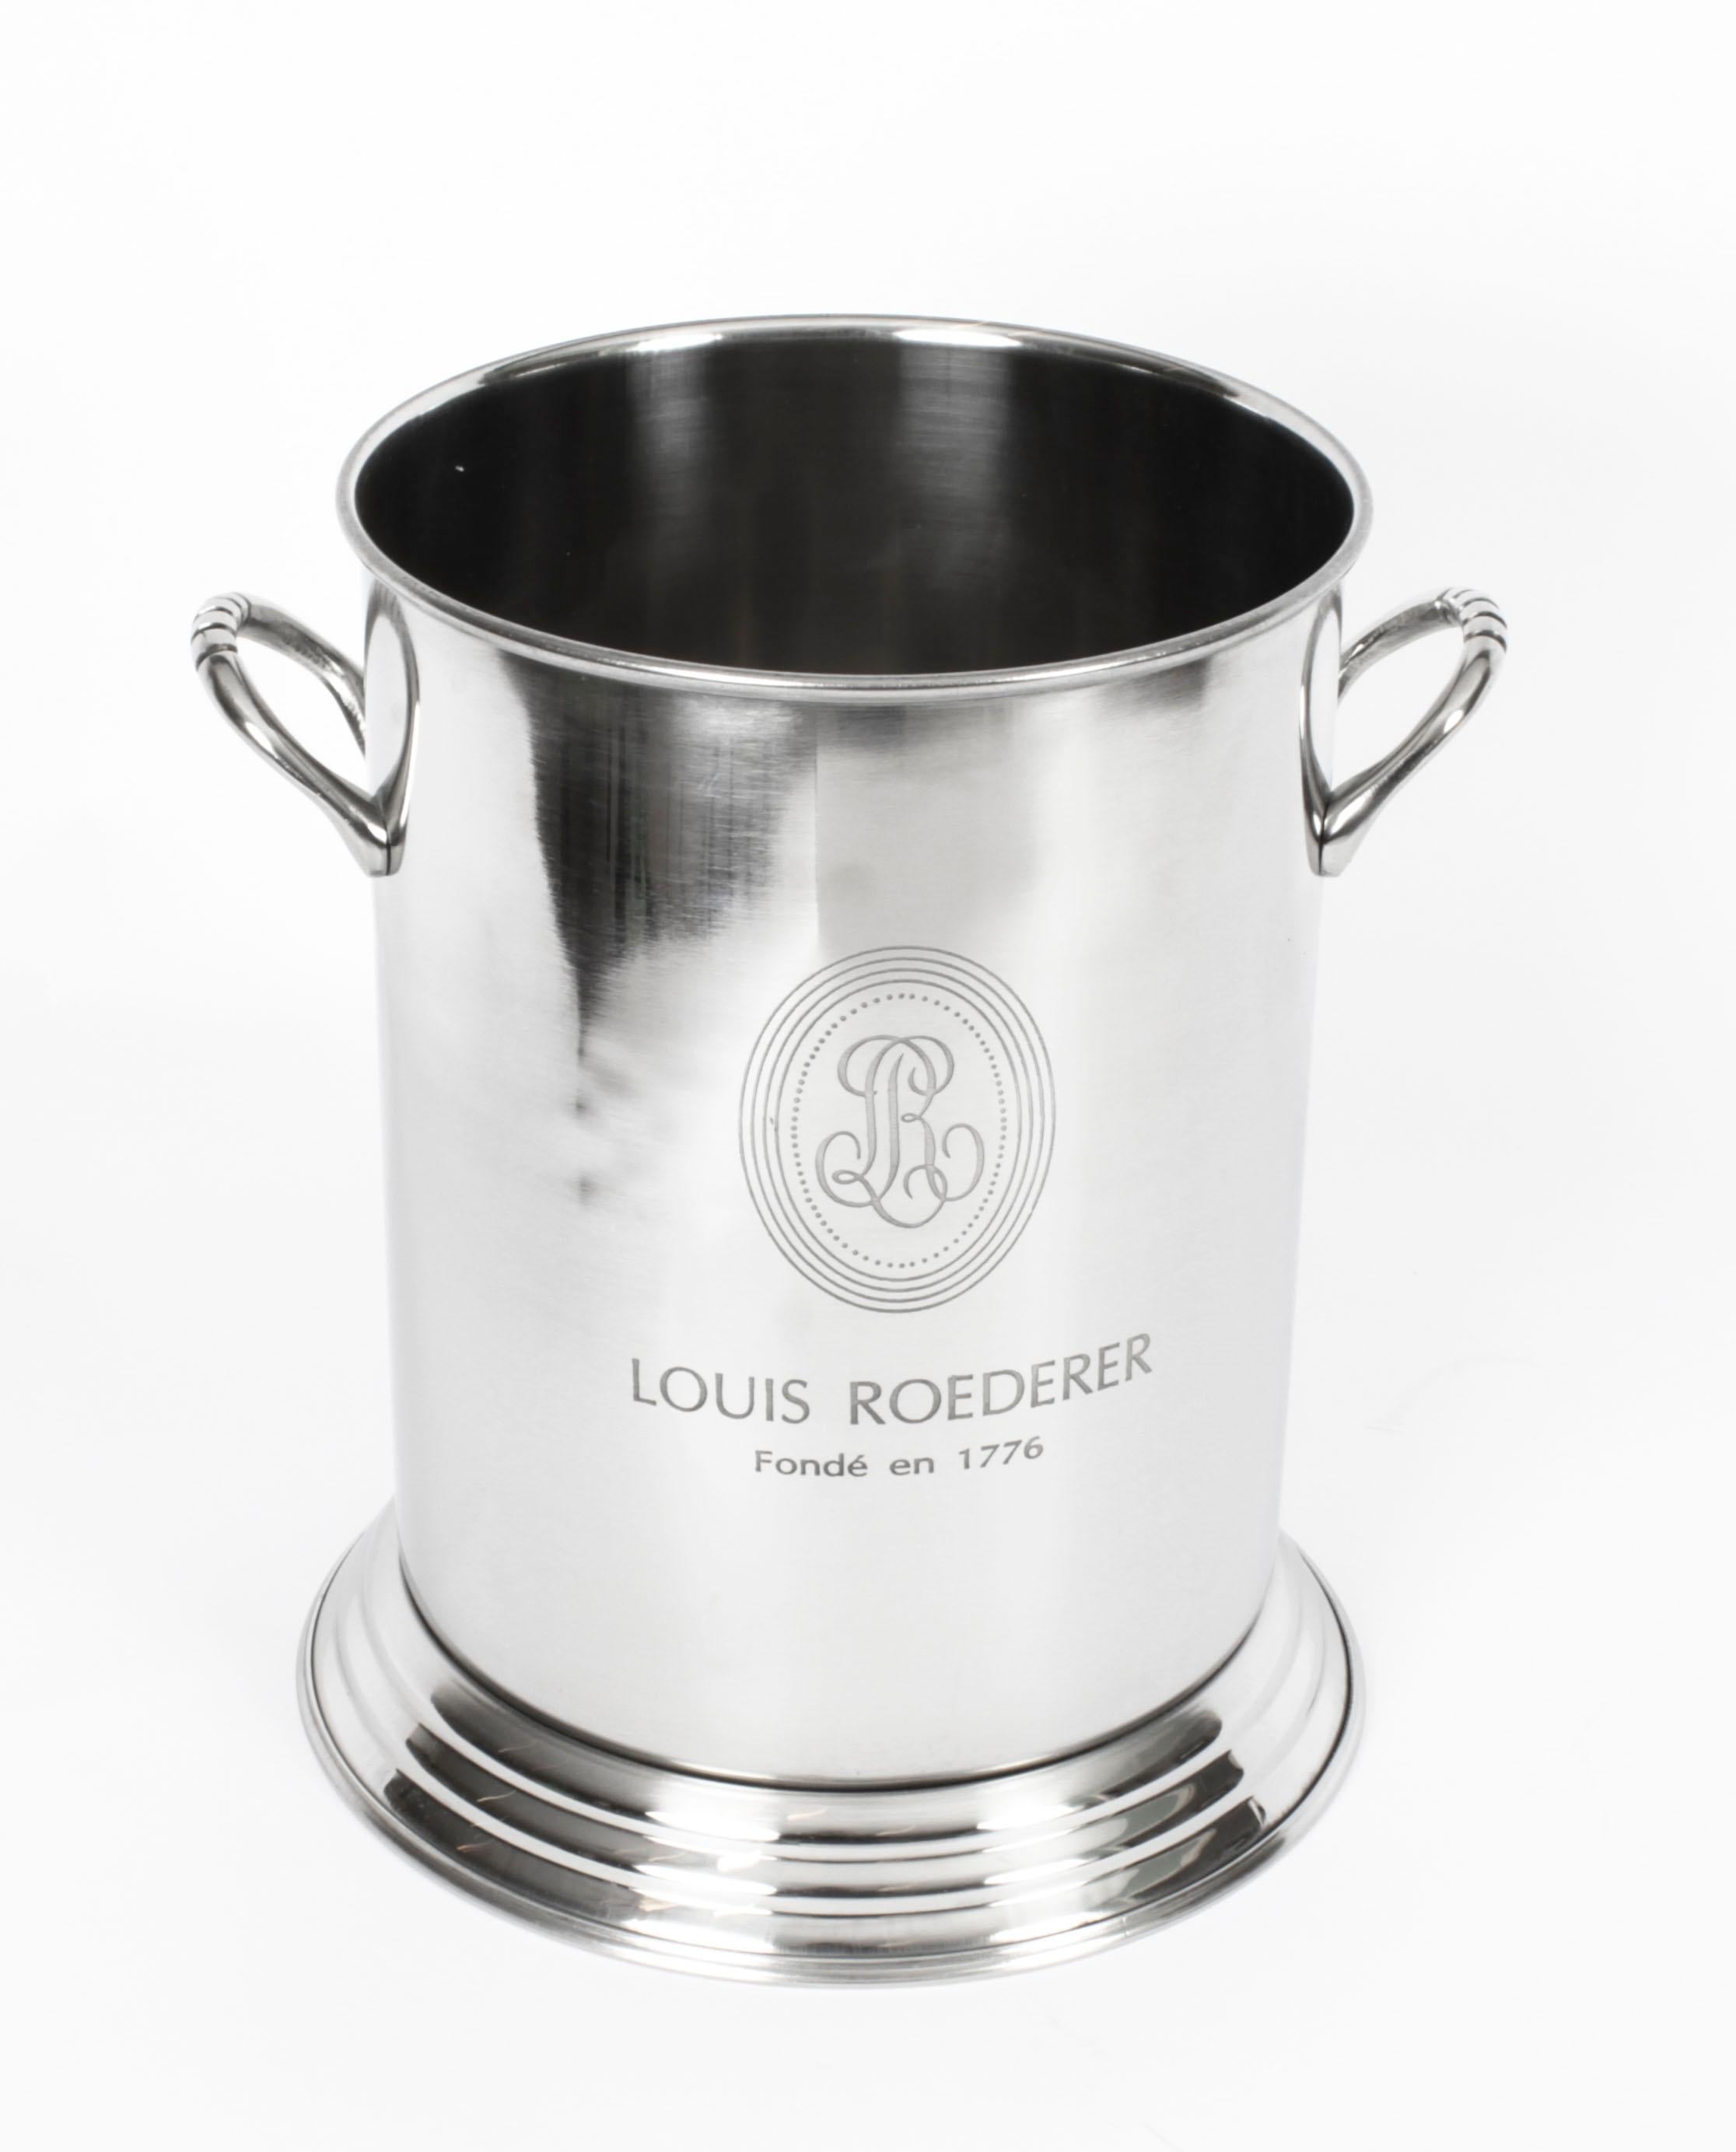 This is a gorgeous vintage silver plated champagne / wine cooler. 

It is boldly engraved Louis Roederer Fonde en 1776 on the side with the LR logo.

The cooler has twin carrying handles and there is no mistaking the unique quality of this item,